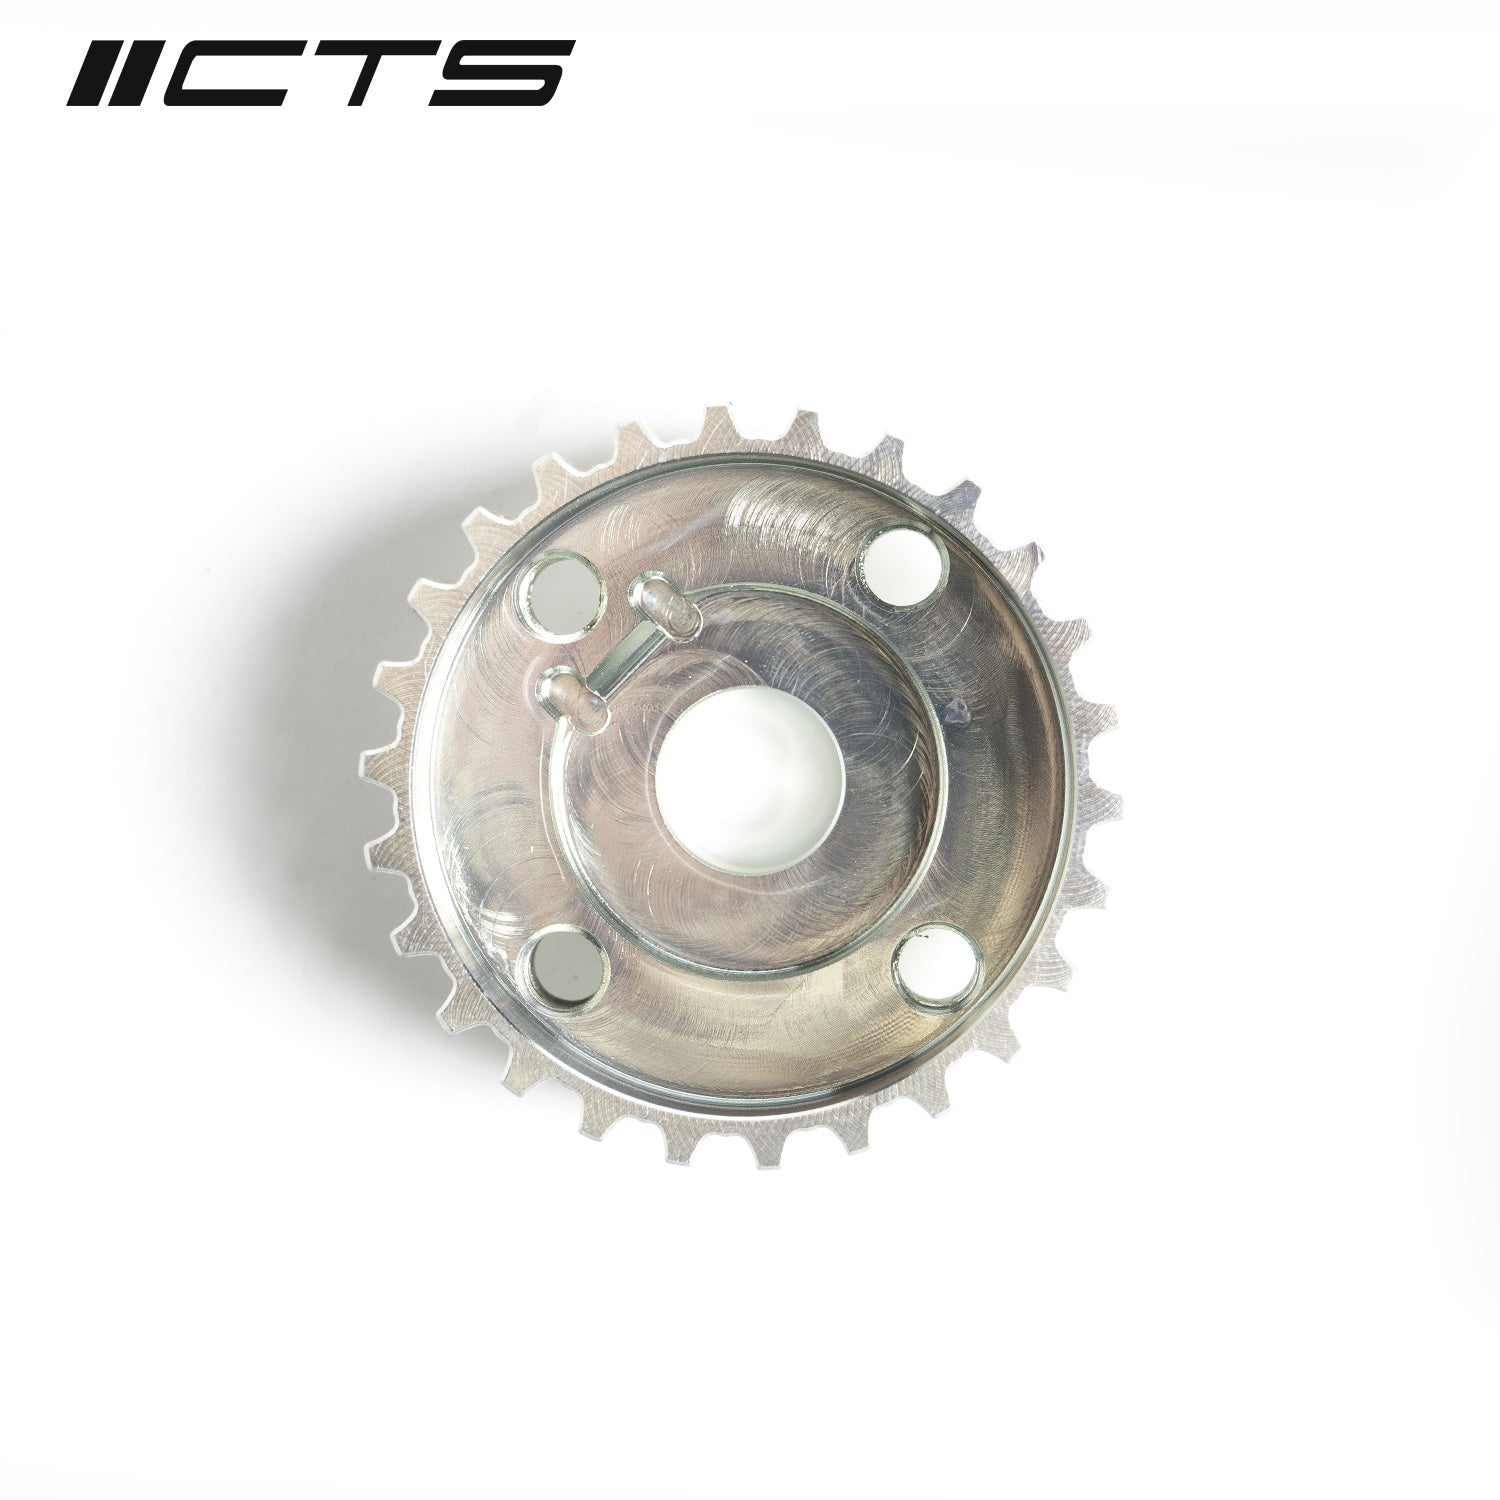 CTS TURBO PRESS FIT TIMING BELT DRIVE GEAR FOR 06A 1.8T 20V ENGINES (4 BOLT)